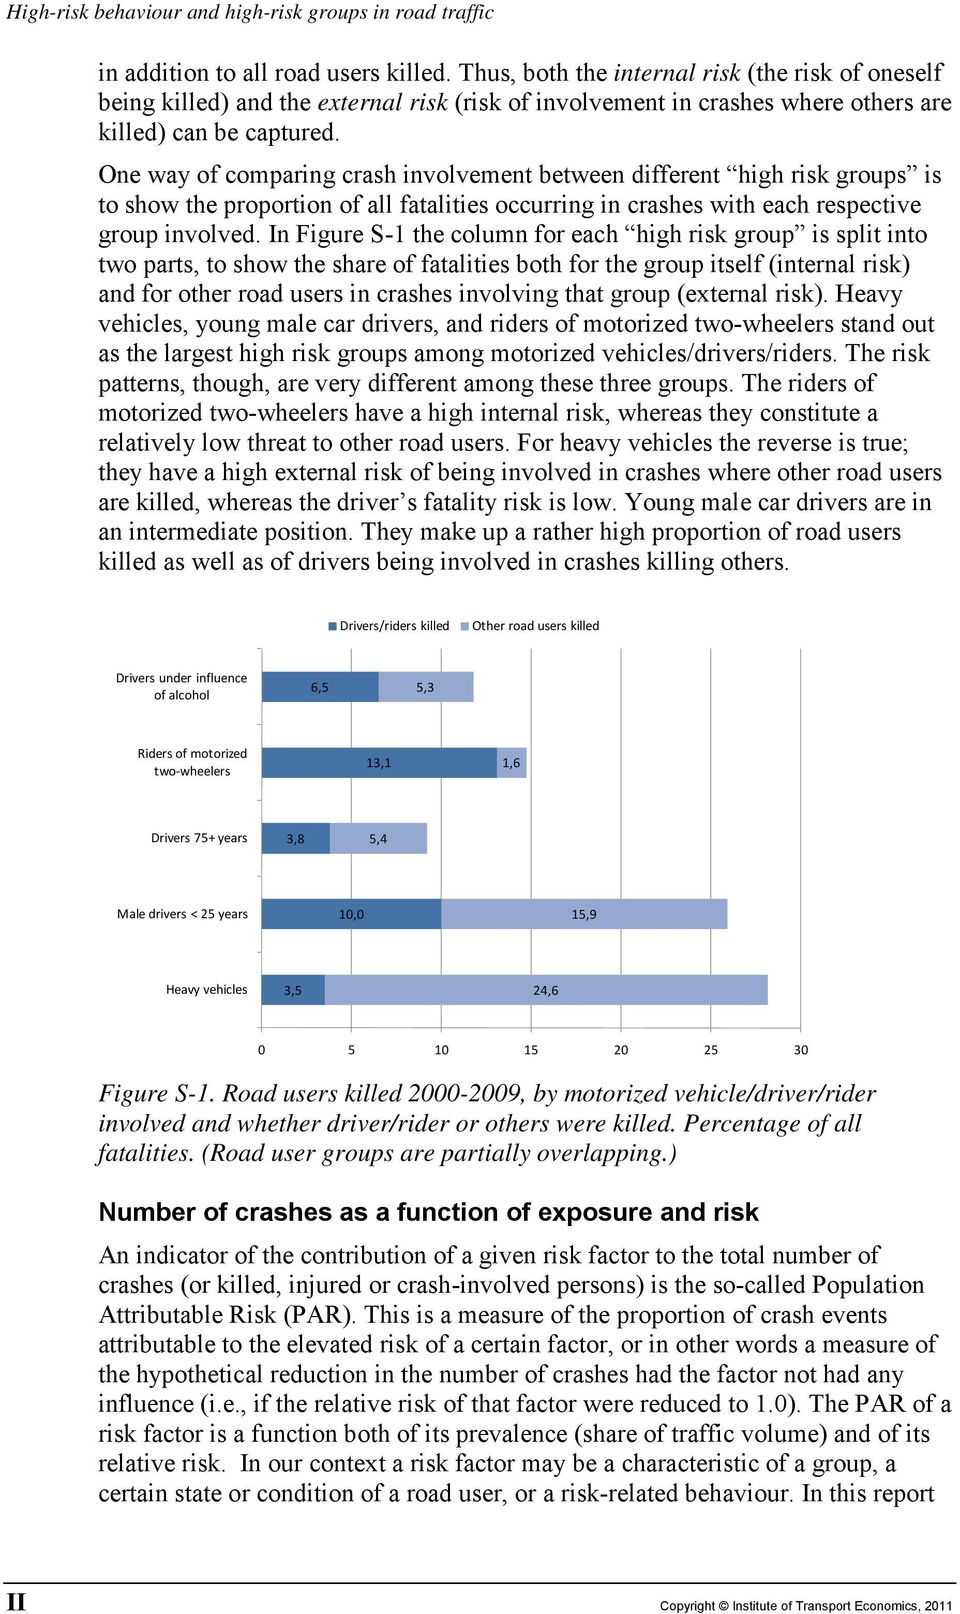 One way of comparing crash involvement between different high risk groups is to show the proportion of all fatalities occurring in crashes with each respective group involved.